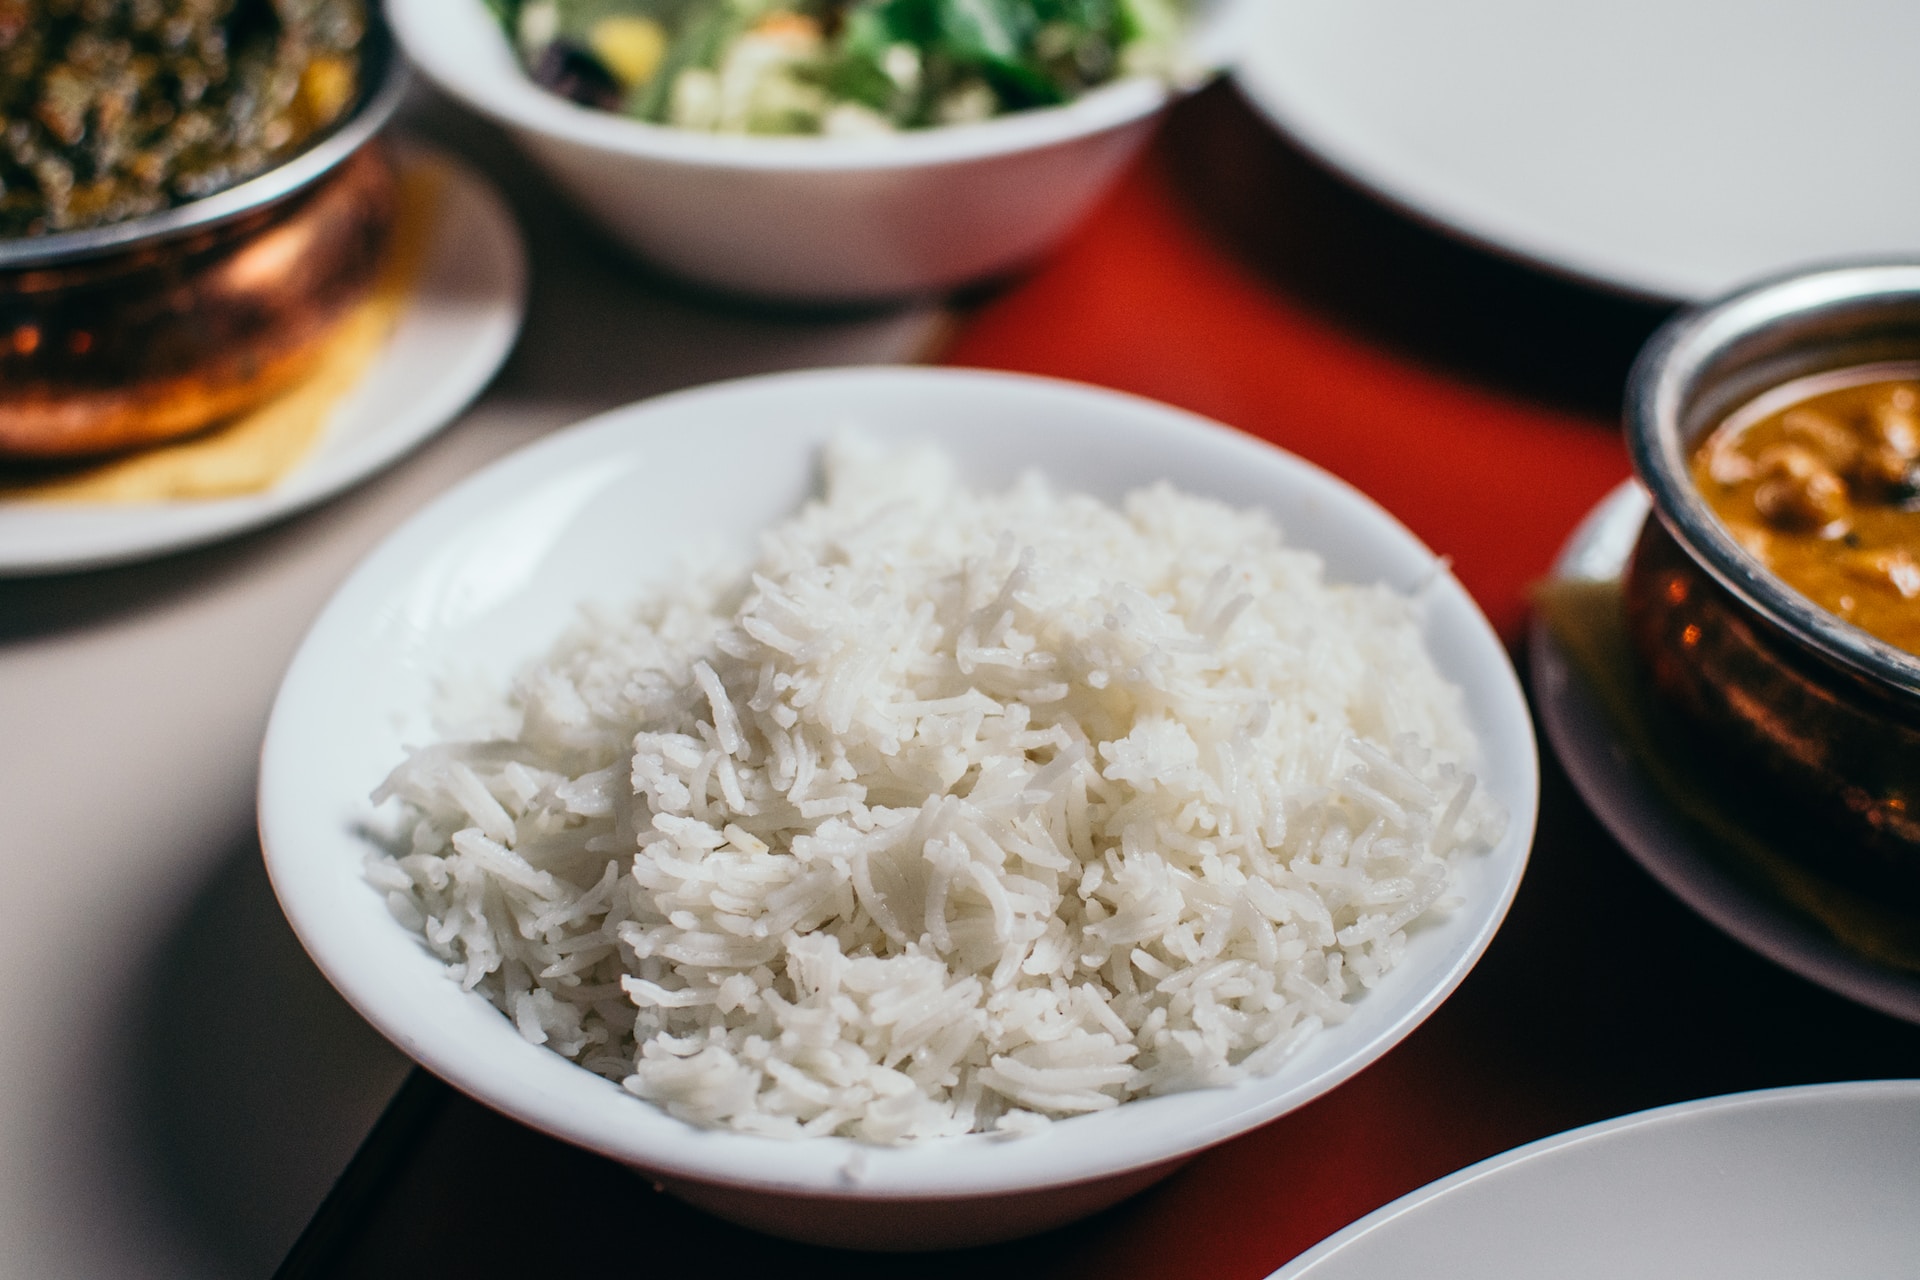 All about rice: The staple grain in your life